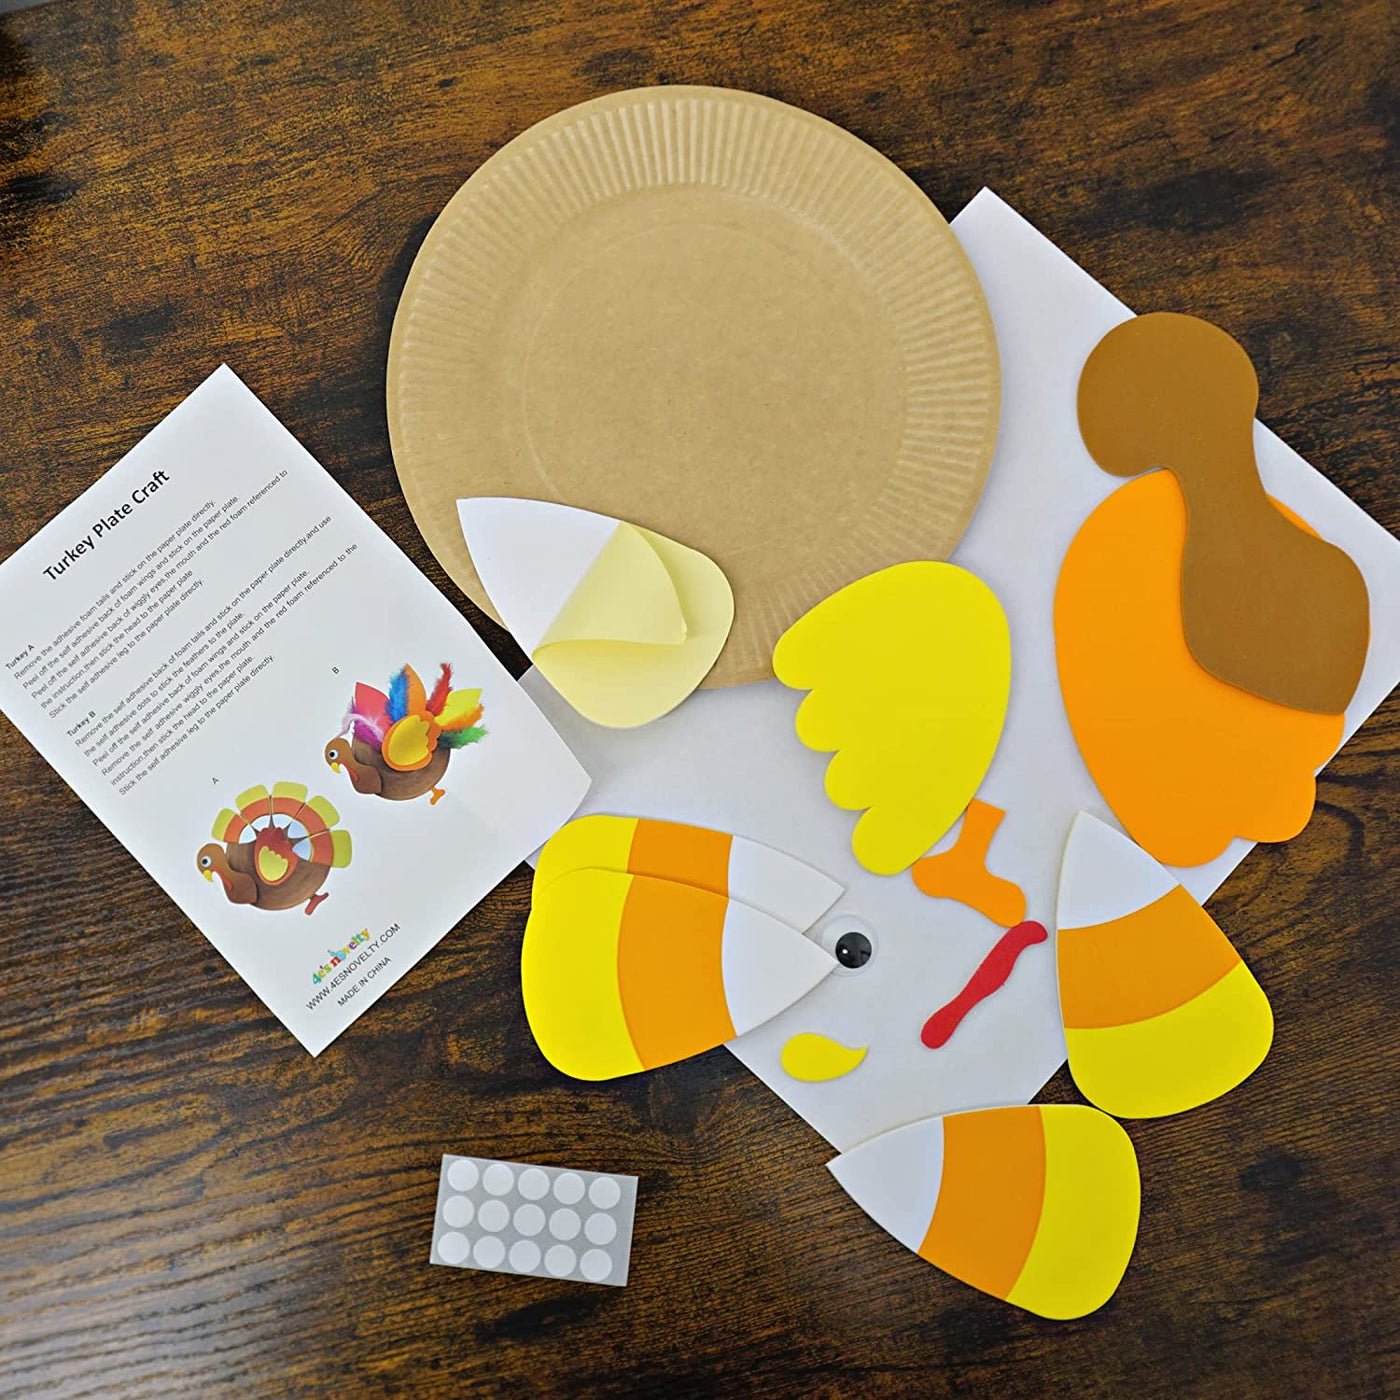 4E's Novelty Turkey Plate Craft for Kids (12 Pack) 2 Styles, Self Adhesive, Fall Thanksgiving Crafts for Kids & Toddlers Ages 4-8, 3-12 Fun Thanksgiving Activity & Dinner Game